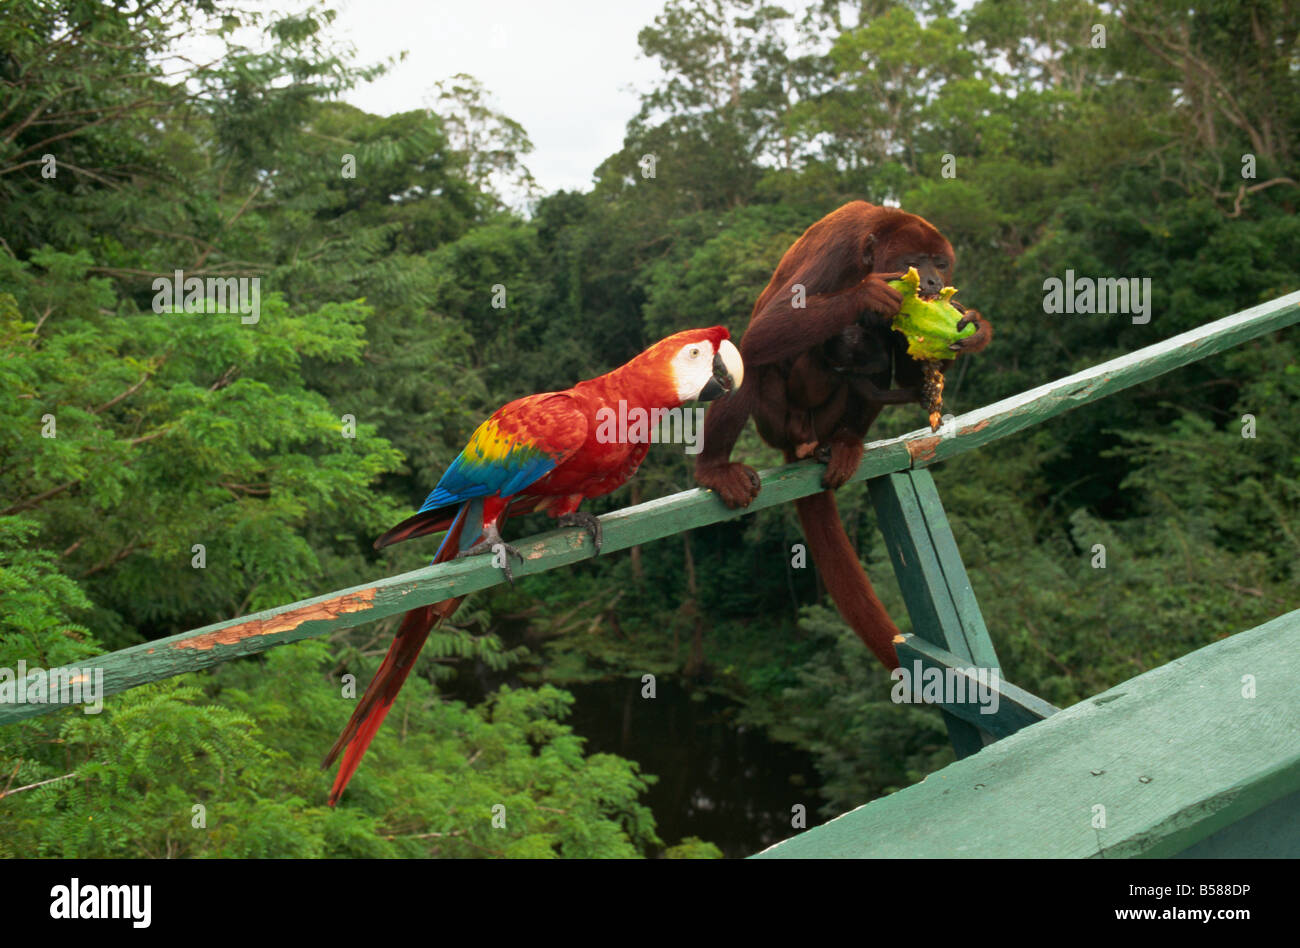 Macaw and monkey compete for fruit Amazon area Brazil South America Stock Photo